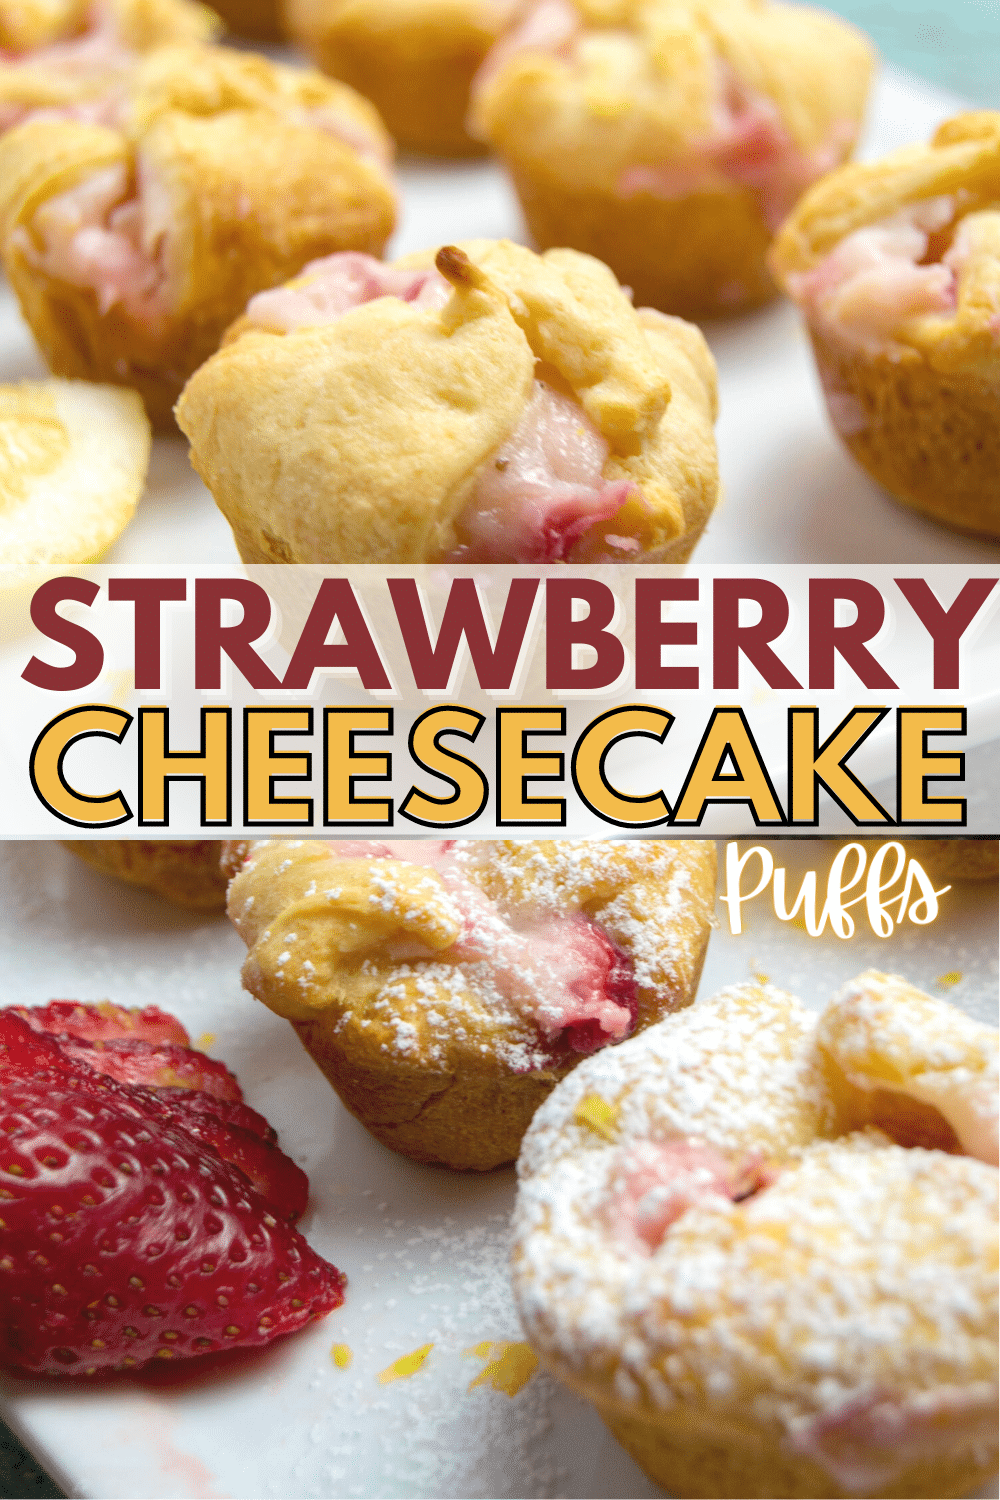 Strawberry Cheesecake Puffs are simple to make with croissant dough and fresh strawberries. These delicious puffs are a delightful dessert. #cheesecake #strawberries #dessert via @wondermomwannab